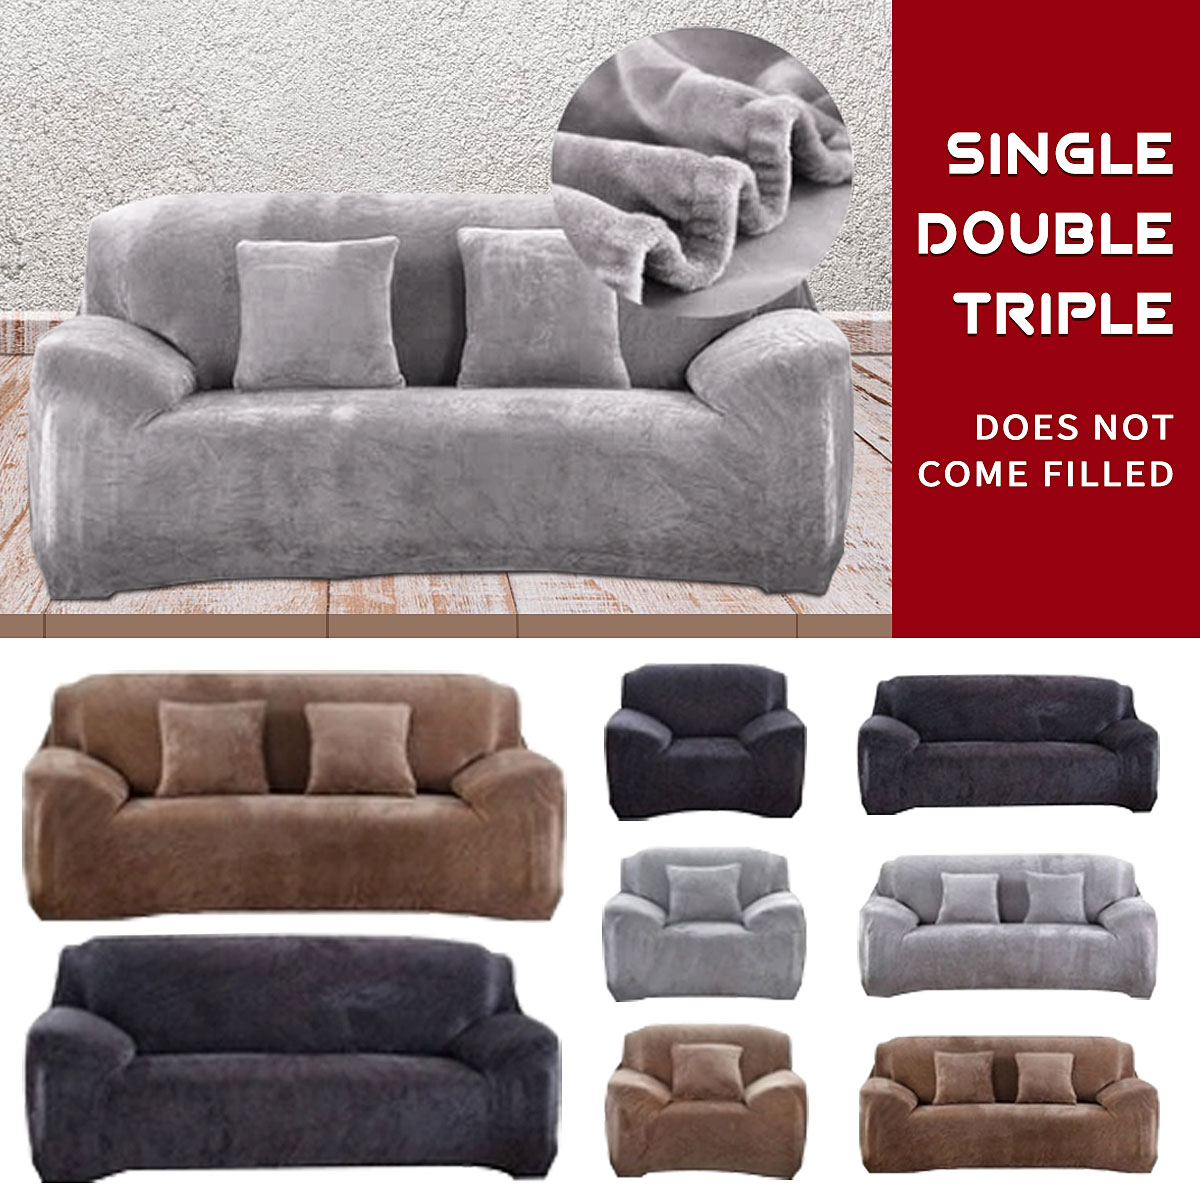 4-Colors-3-Sizes-Sofa-Covers-Couch-Slipcover-Stretch-Chair-Elastic-Fabric-Settee-Protector-1556896-1